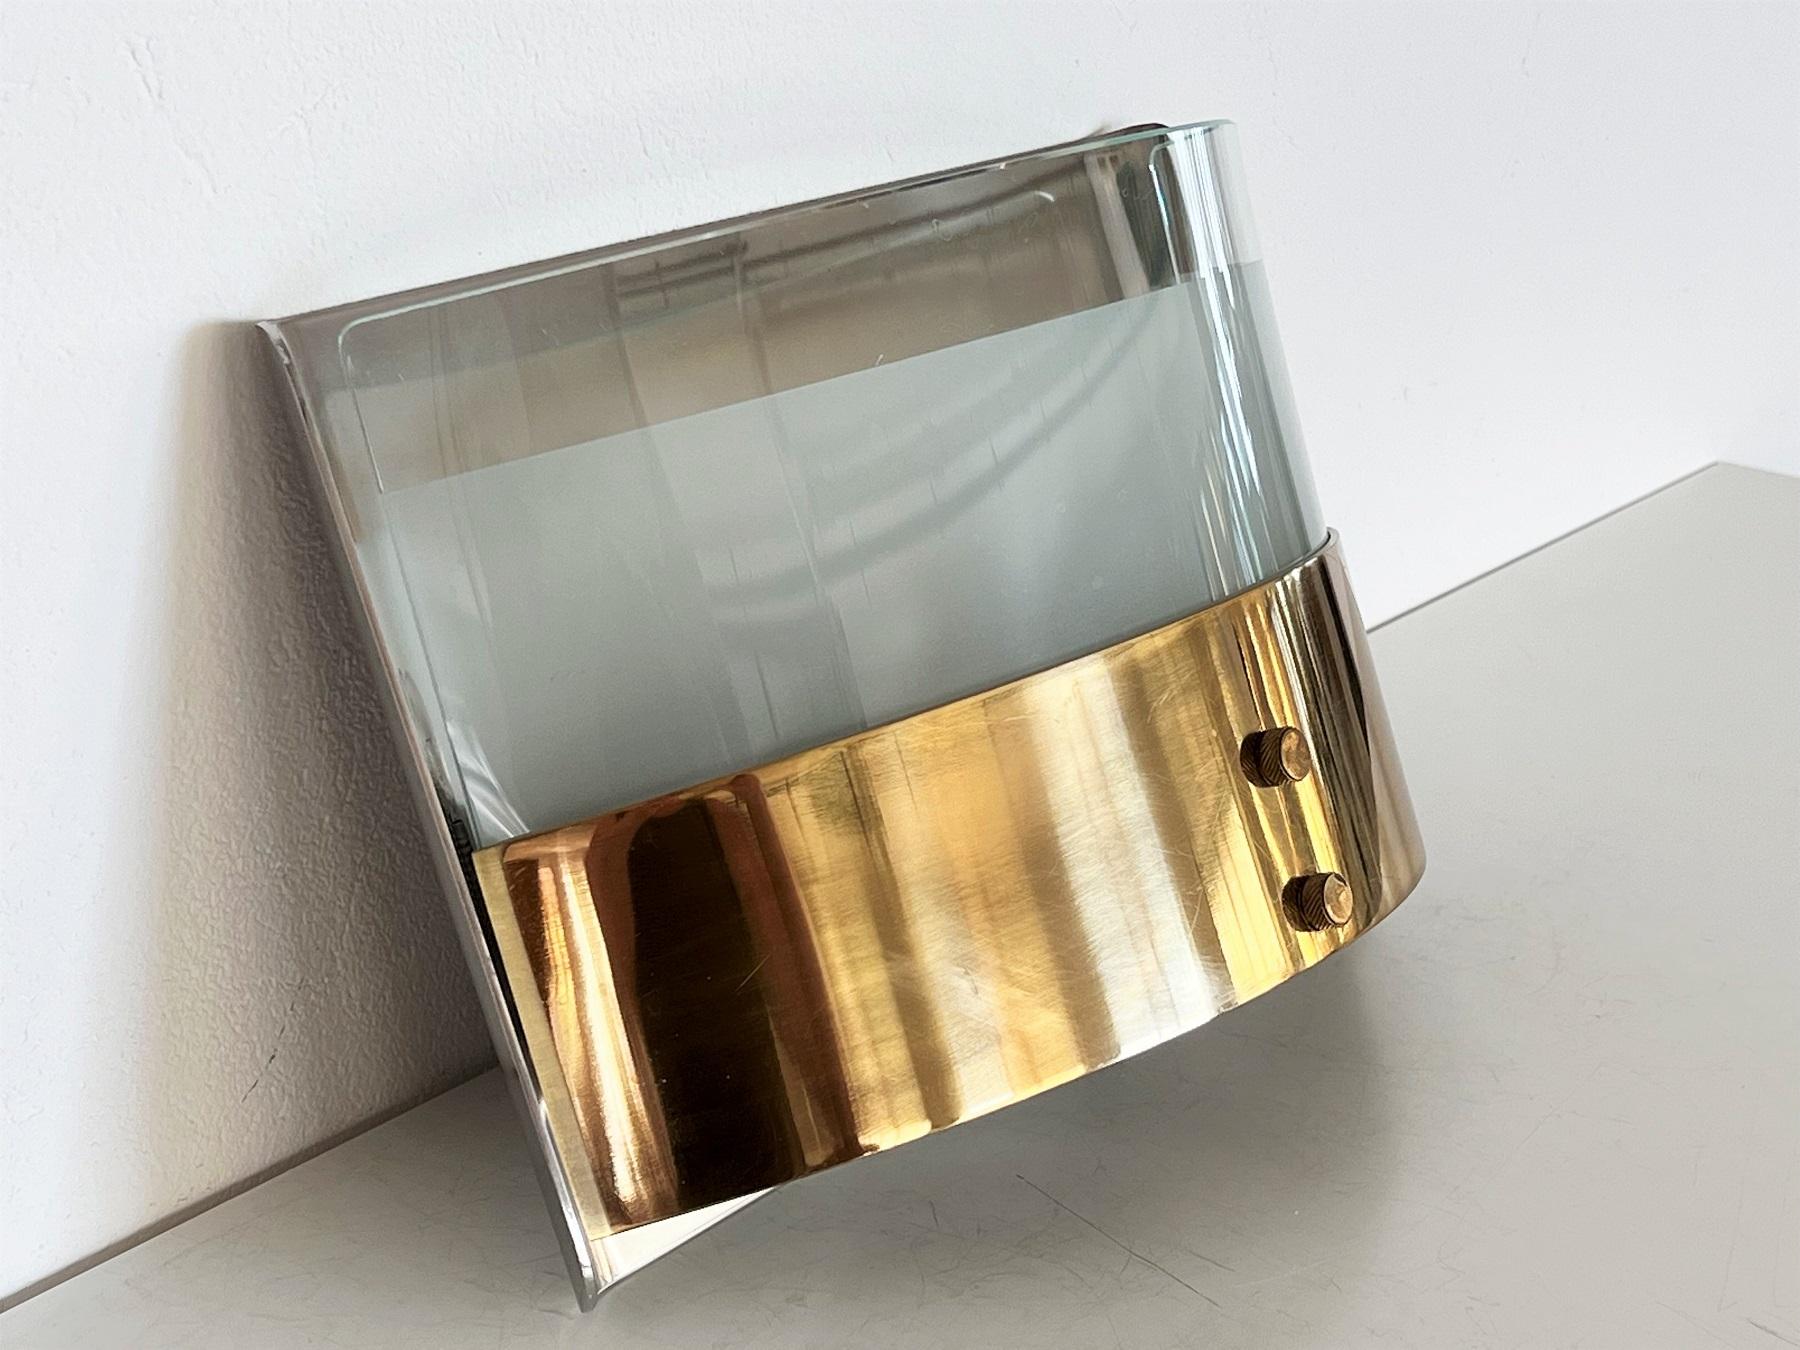 Fantastic strong and heavy wall sconce ( one single piece available) designed from Luigi Caccia Dominioni in 1979 and produced from Azucena in the 80s.
The wall sconce is made of gorgeous brass with dark patina from the time, and a curved lampshade